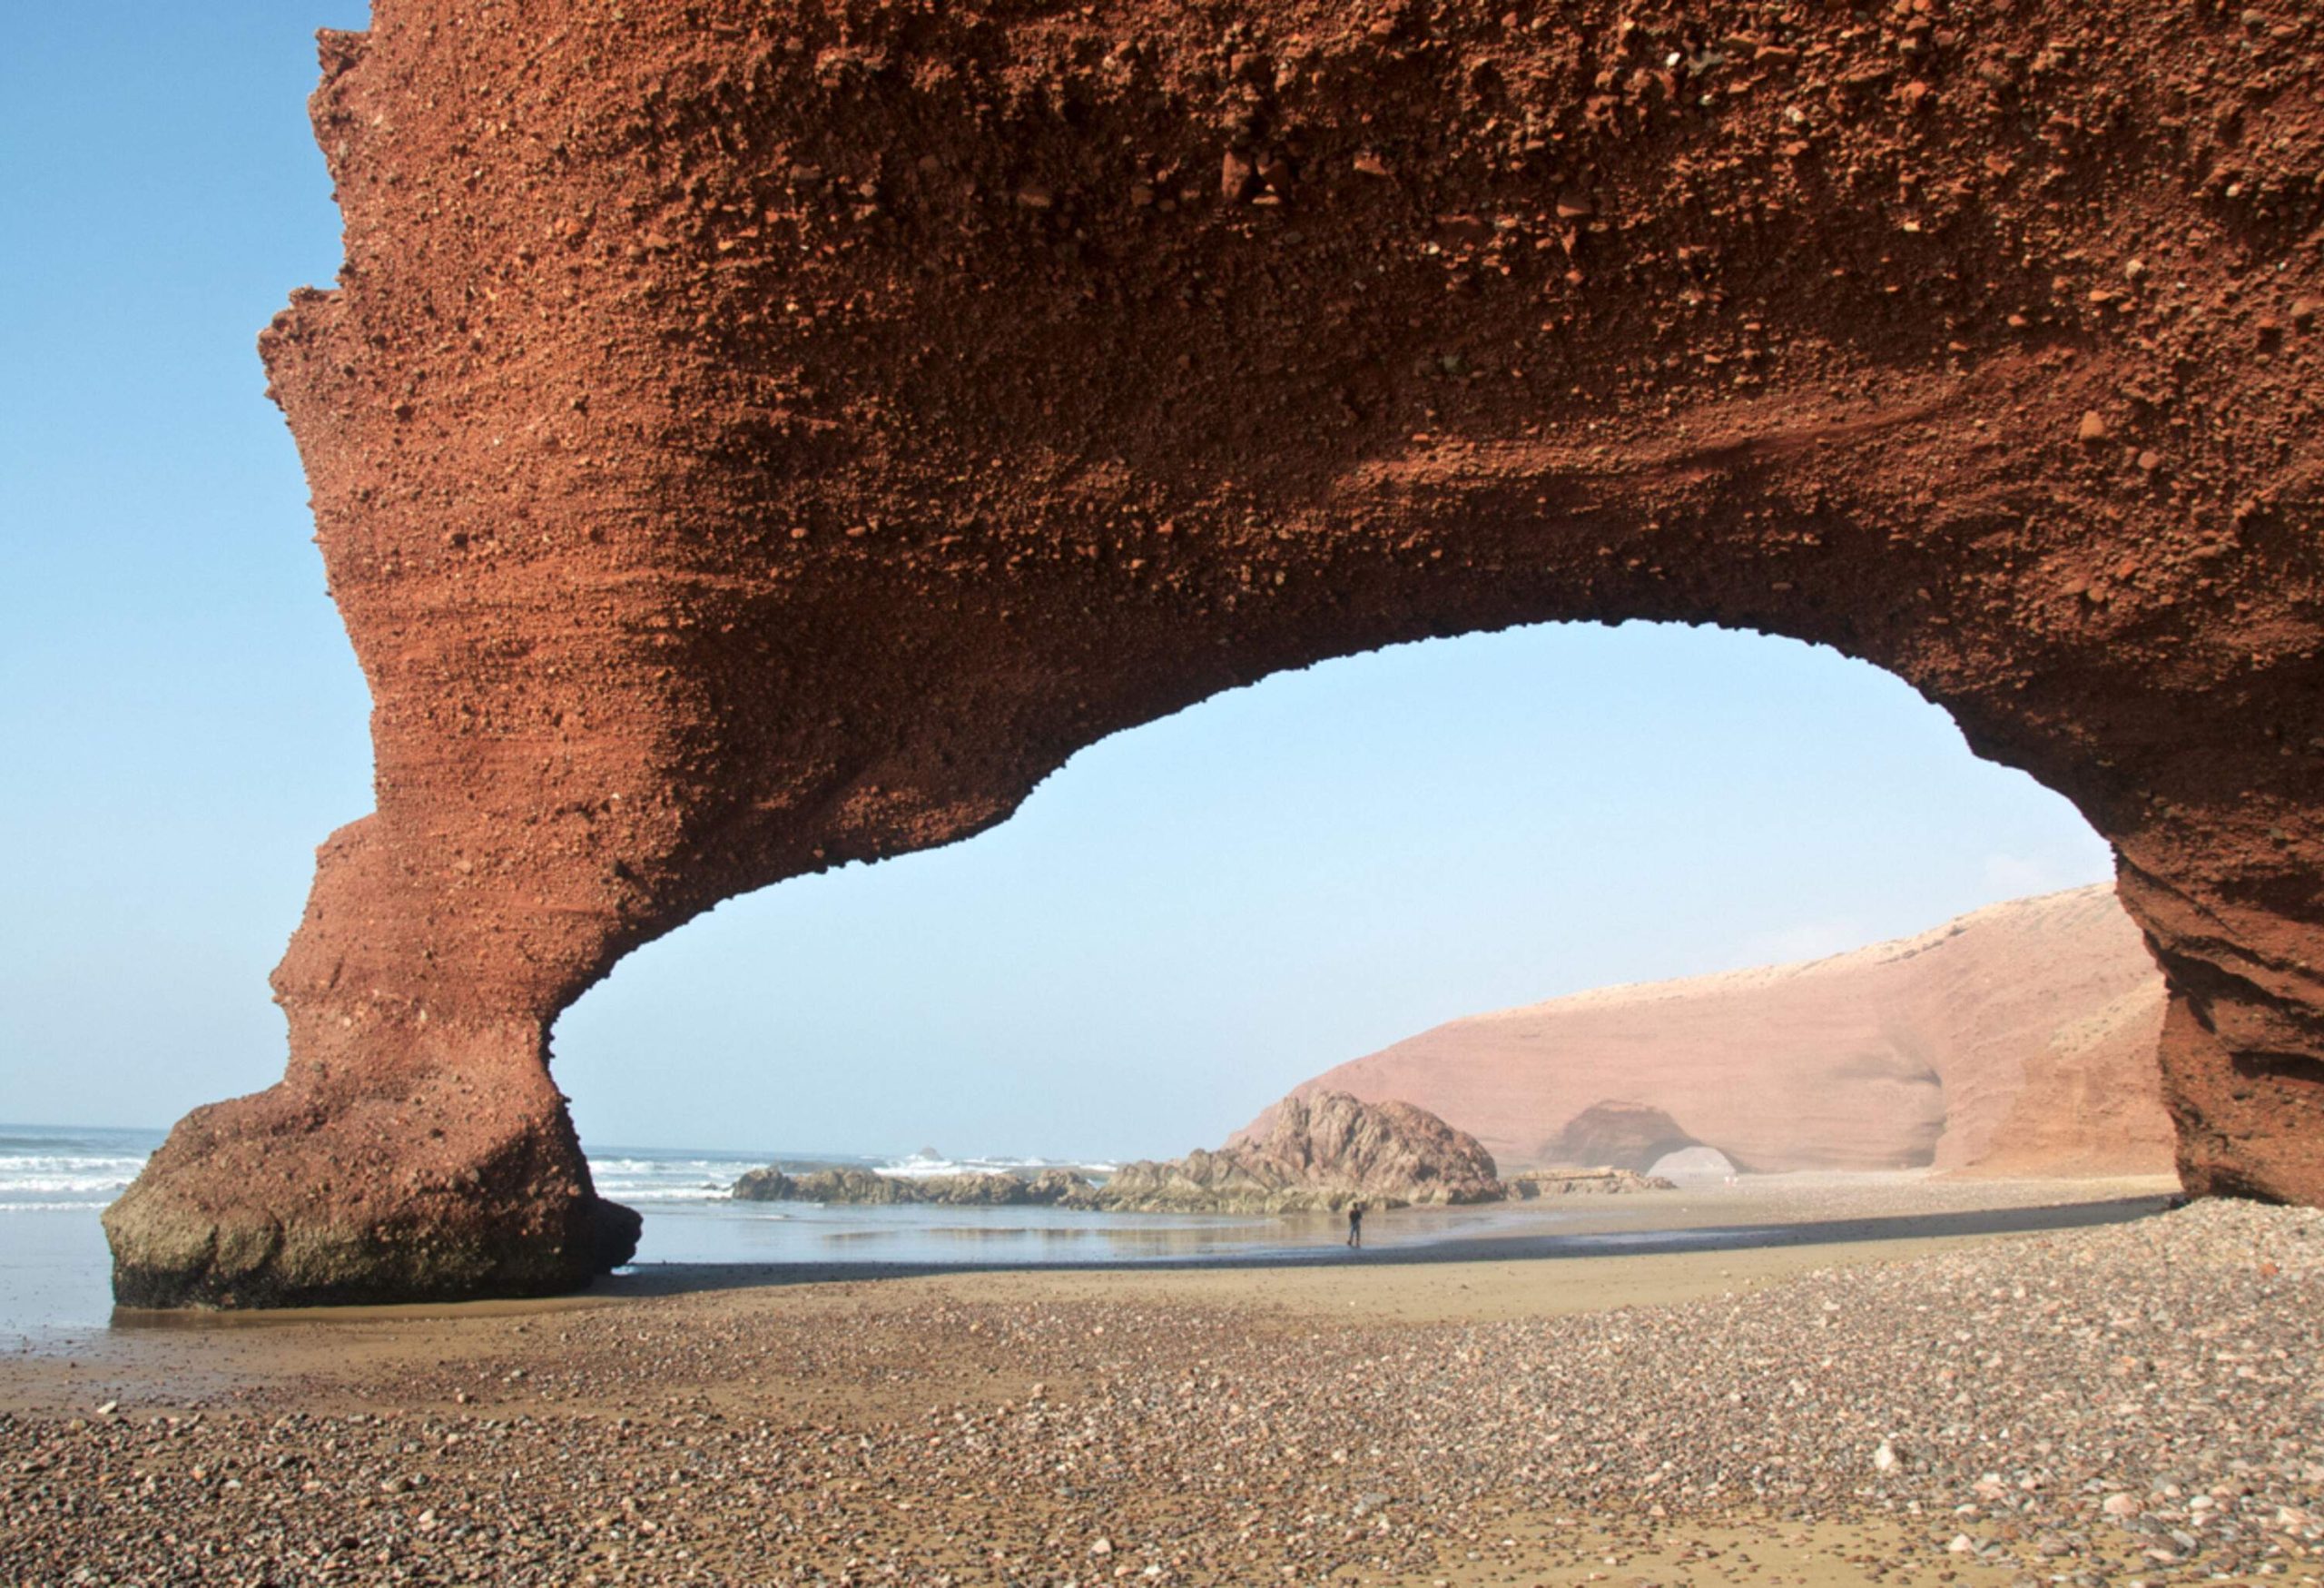 A person stands on a pebbled beach under an arched rock formation.